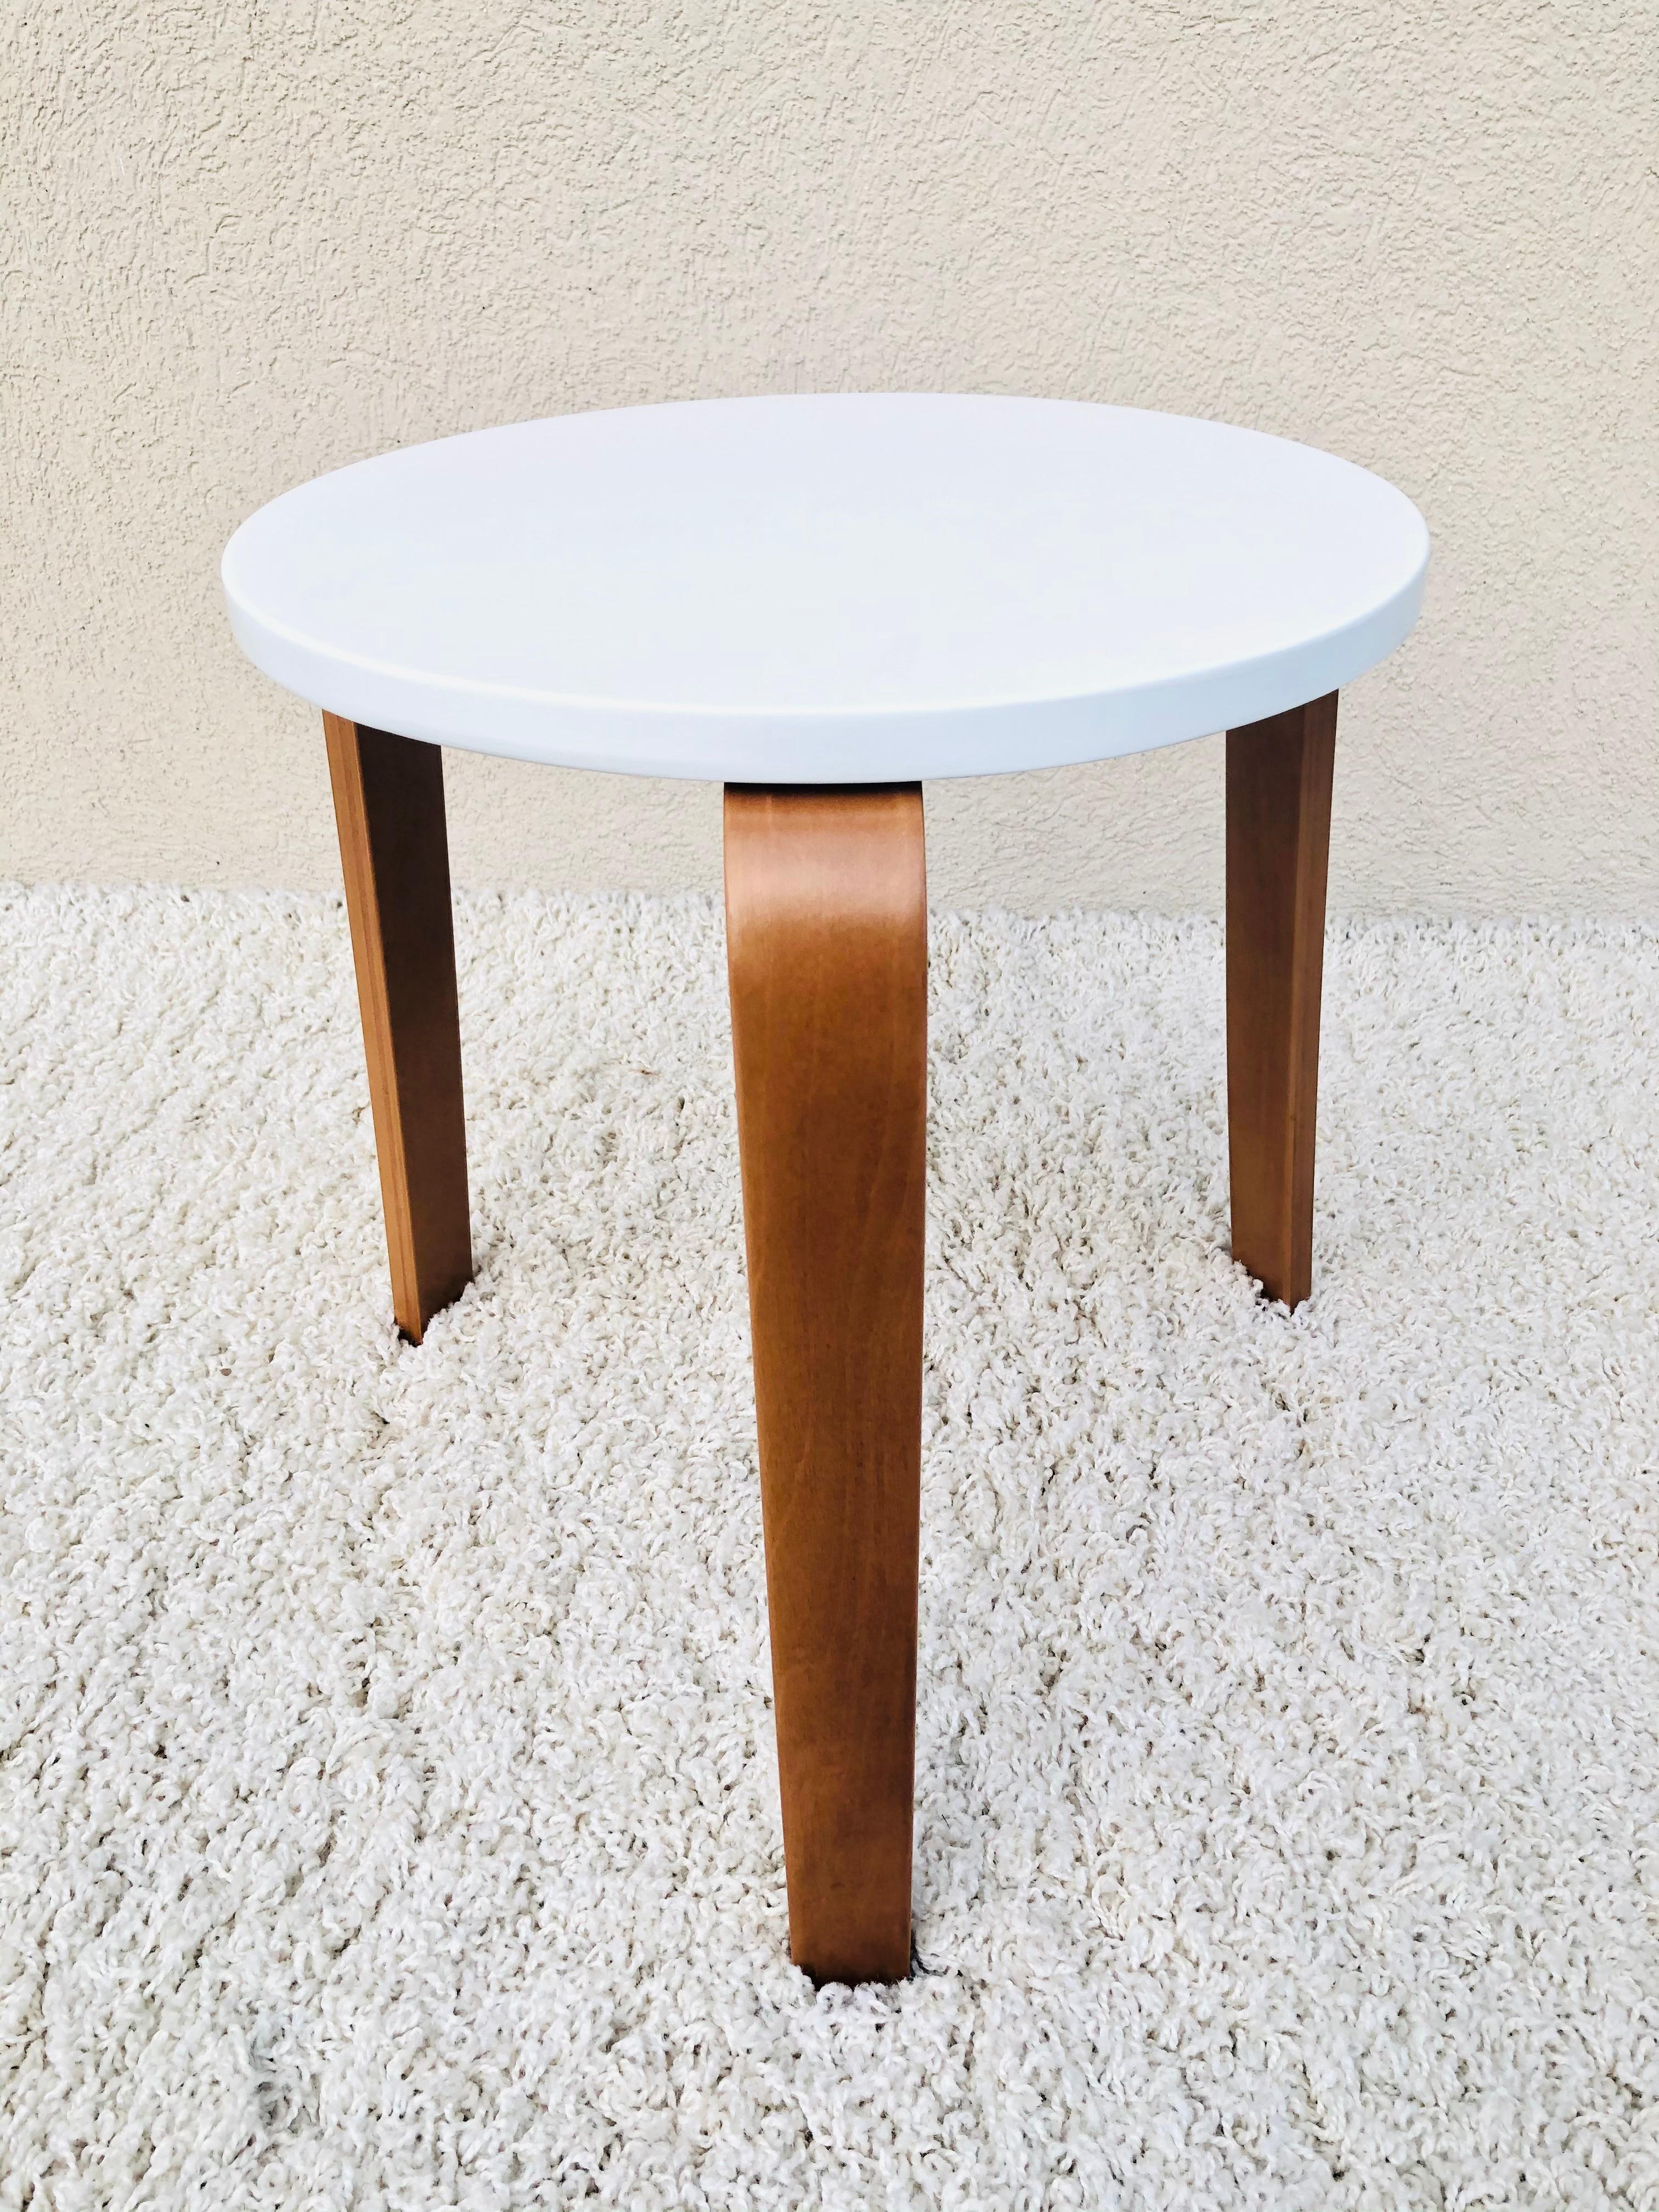 Alvar Alto style European lacquered top bentwood leg birch maple color midcentury Small
Side table / stool.